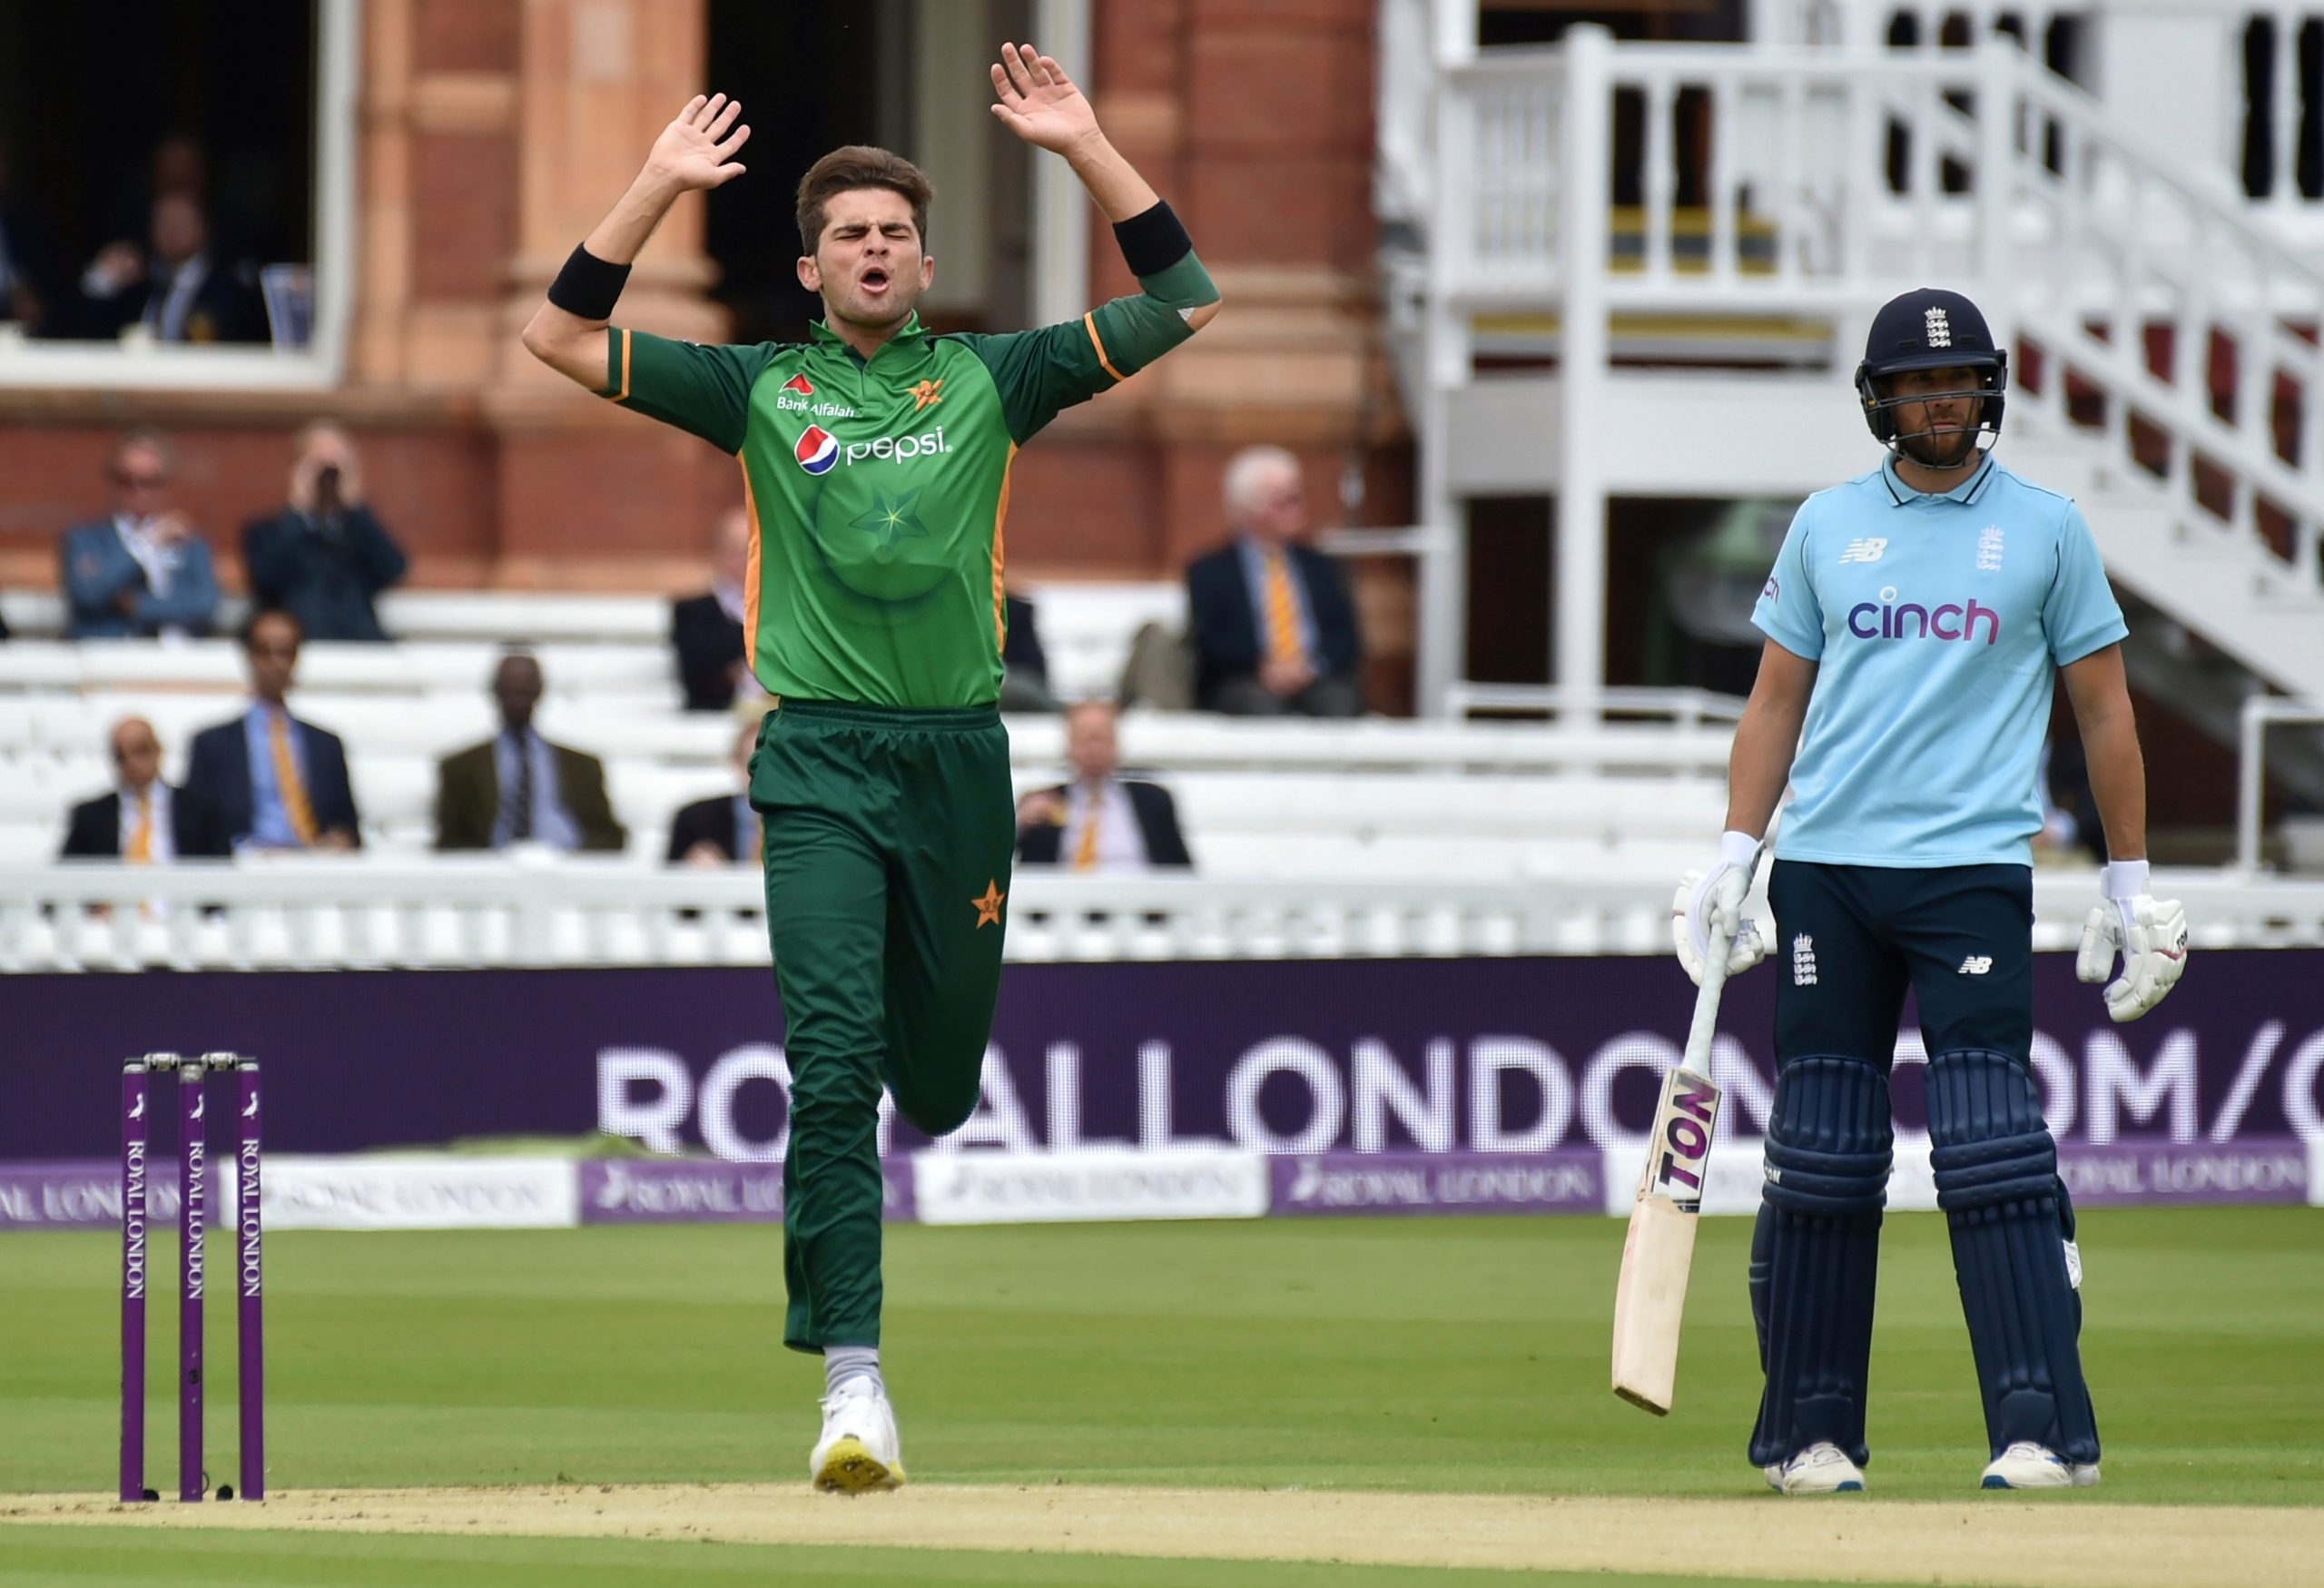 Will Pakistan bowler Shaheen Shah Afridi be back for T20 World Cup 2022